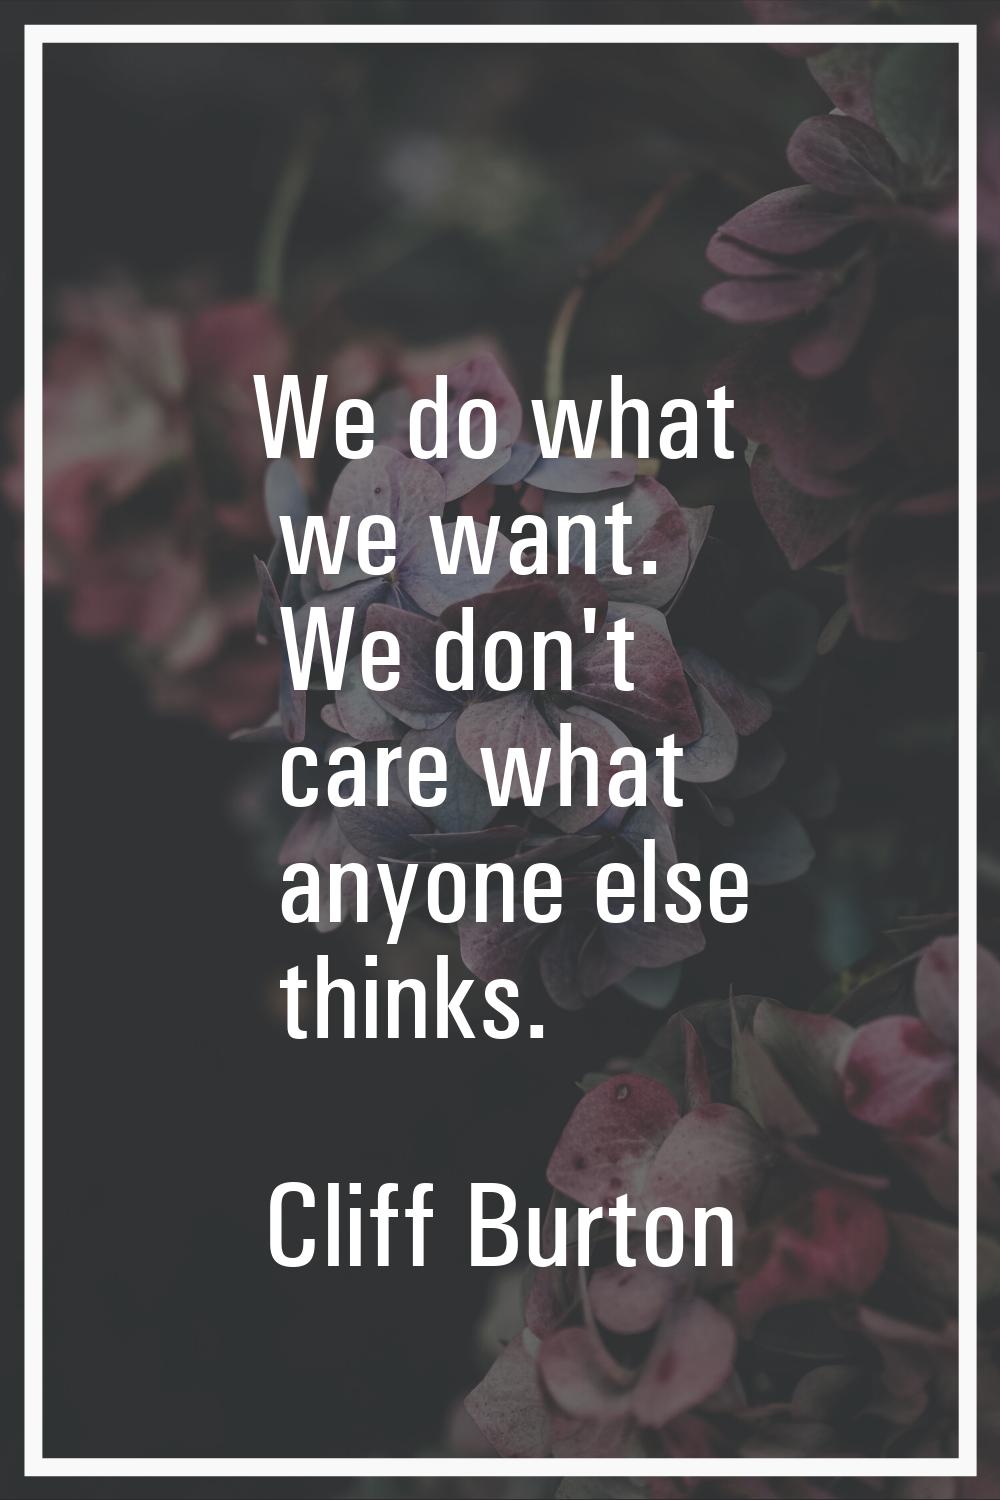 We do what we want. We don't care what anyone else thinks.